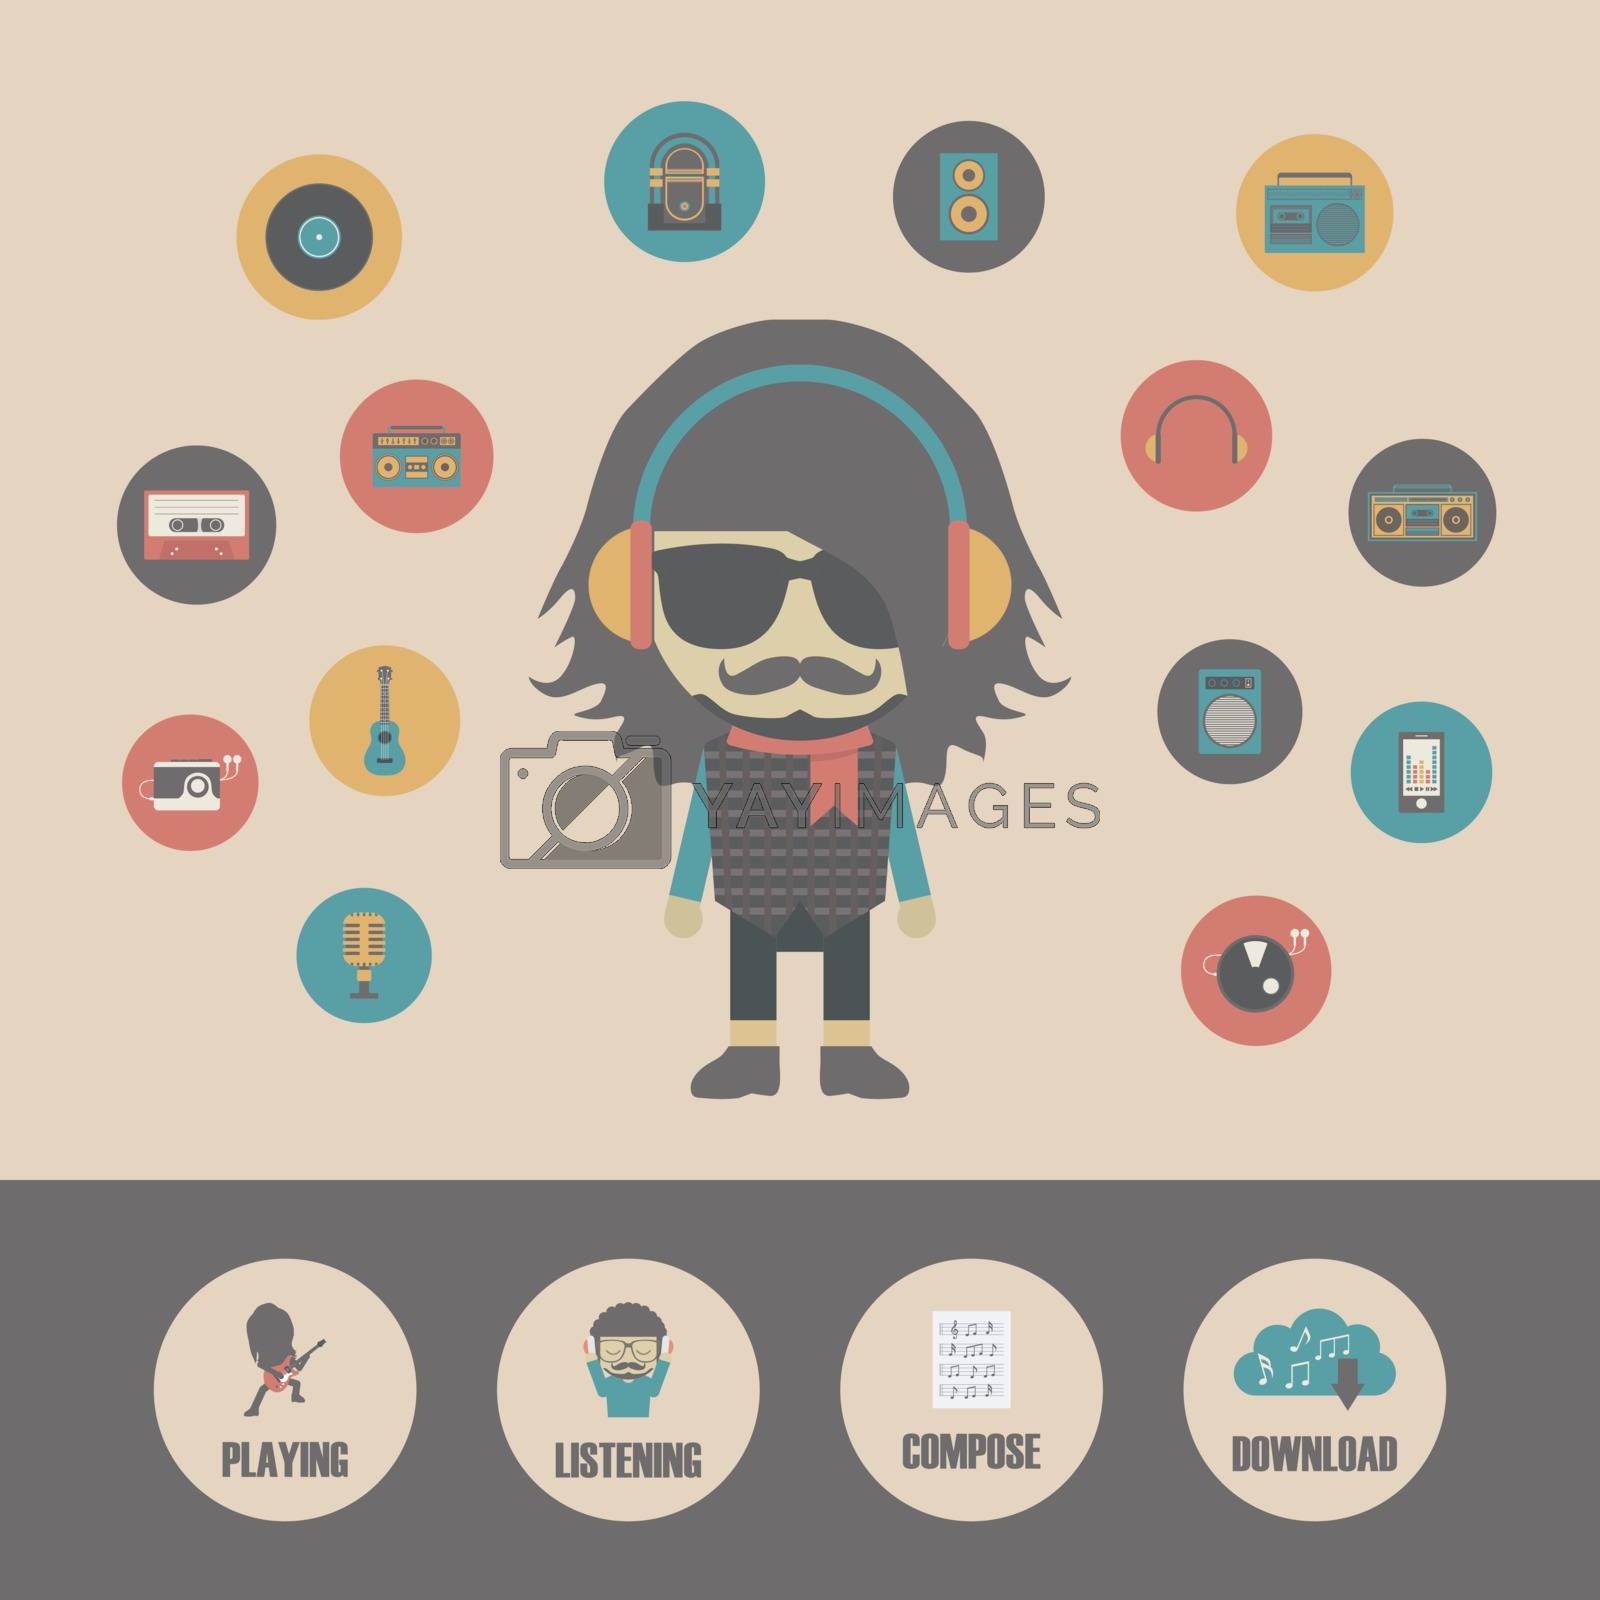 Royalty free image of hipster listening concept by zirconicusso